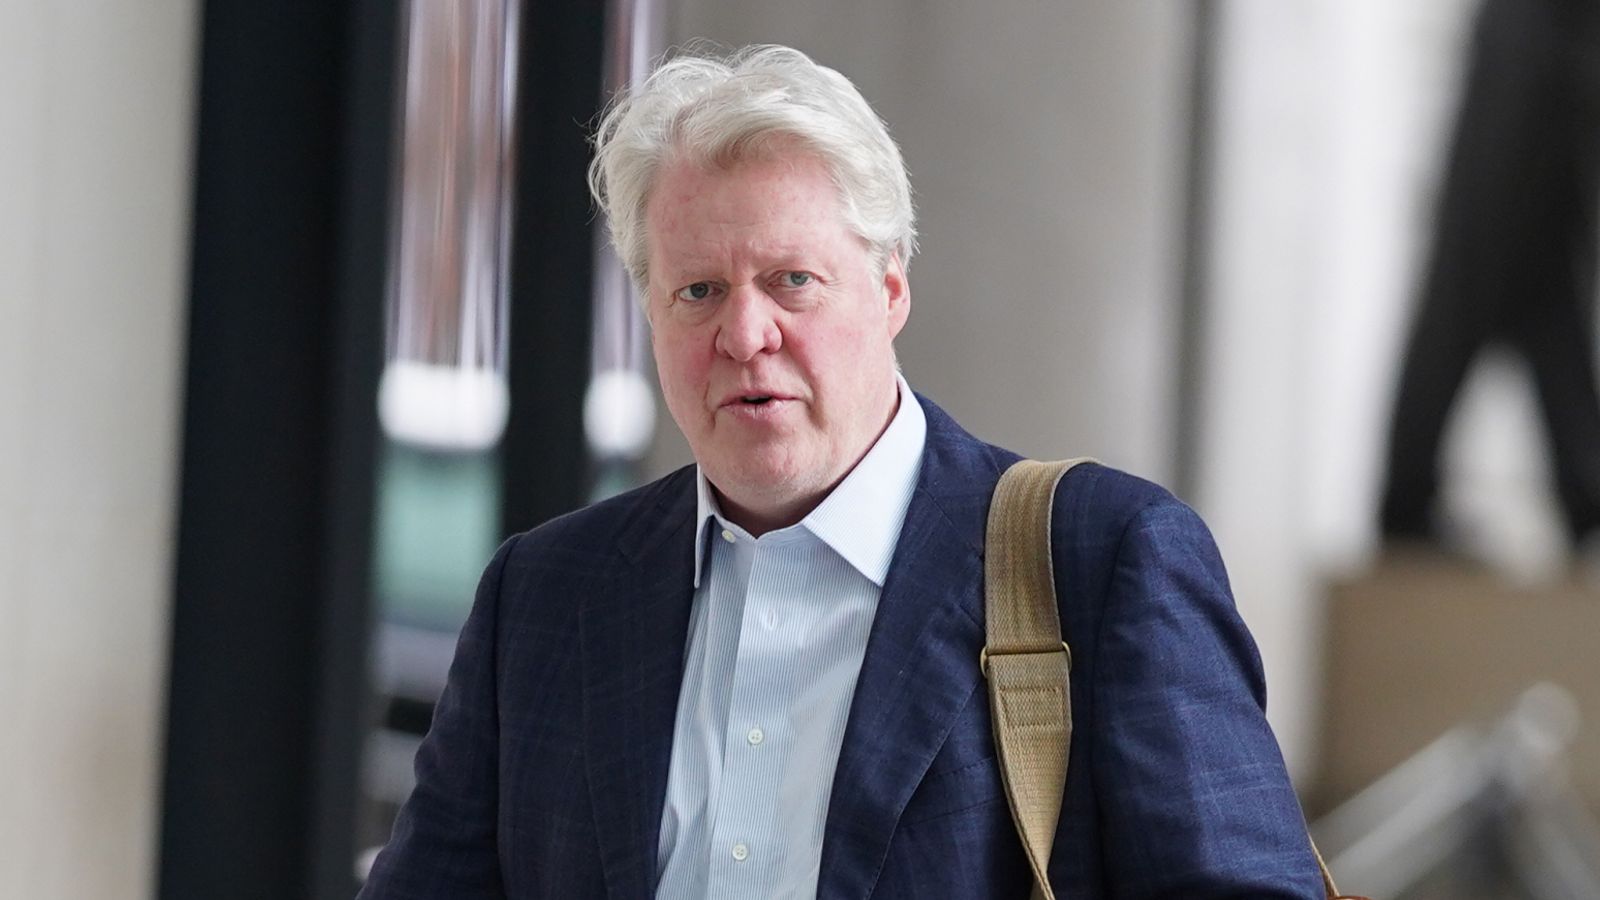 Princess Diana's brother Earl Spencer says he was sexually abused aged 11 at boarding school